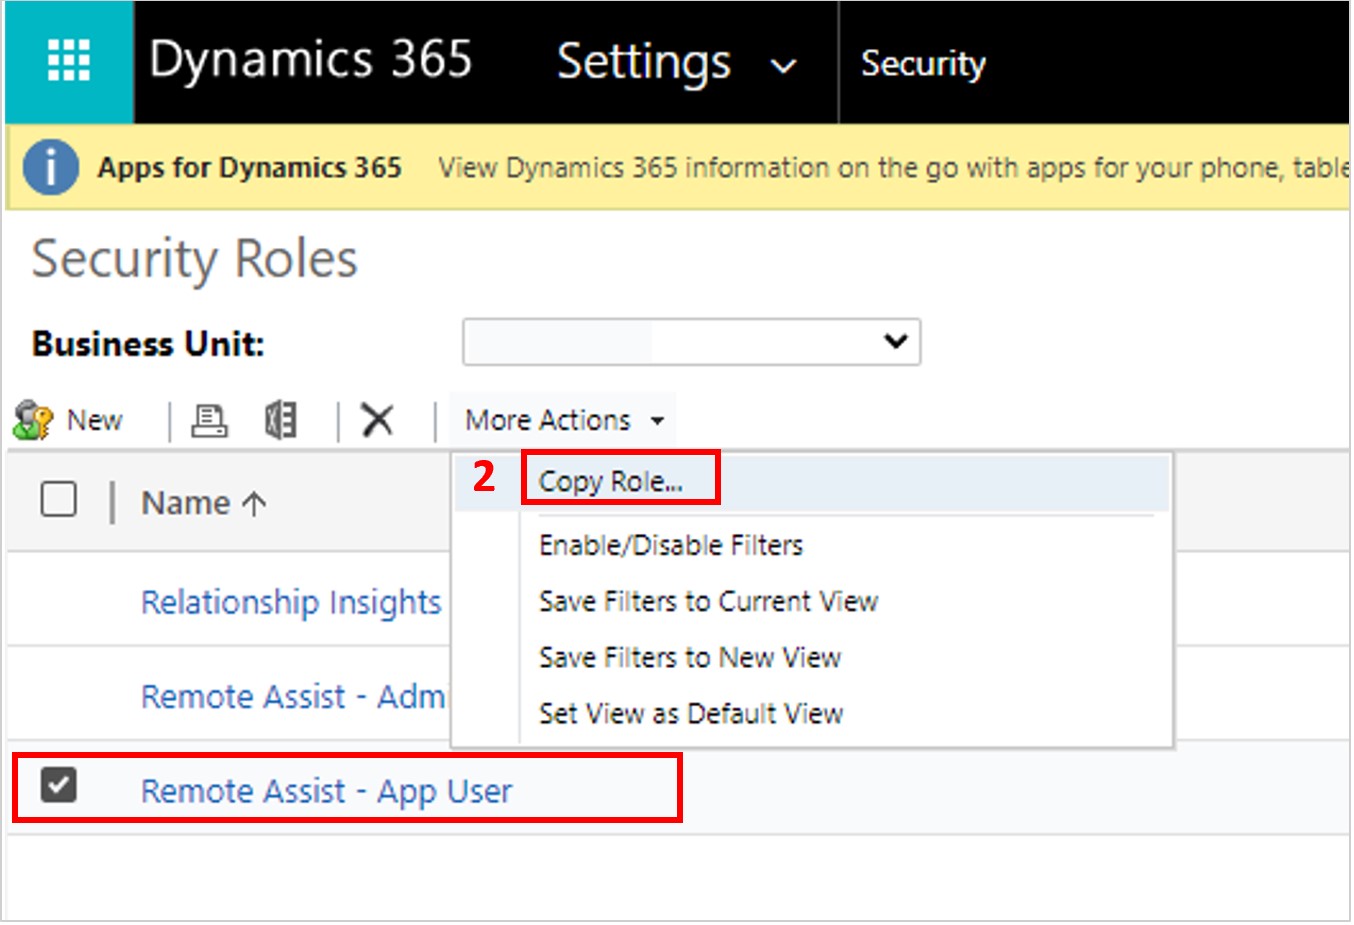 Screenshot of Remote Assist - App User role and Copy Role command highlighted.